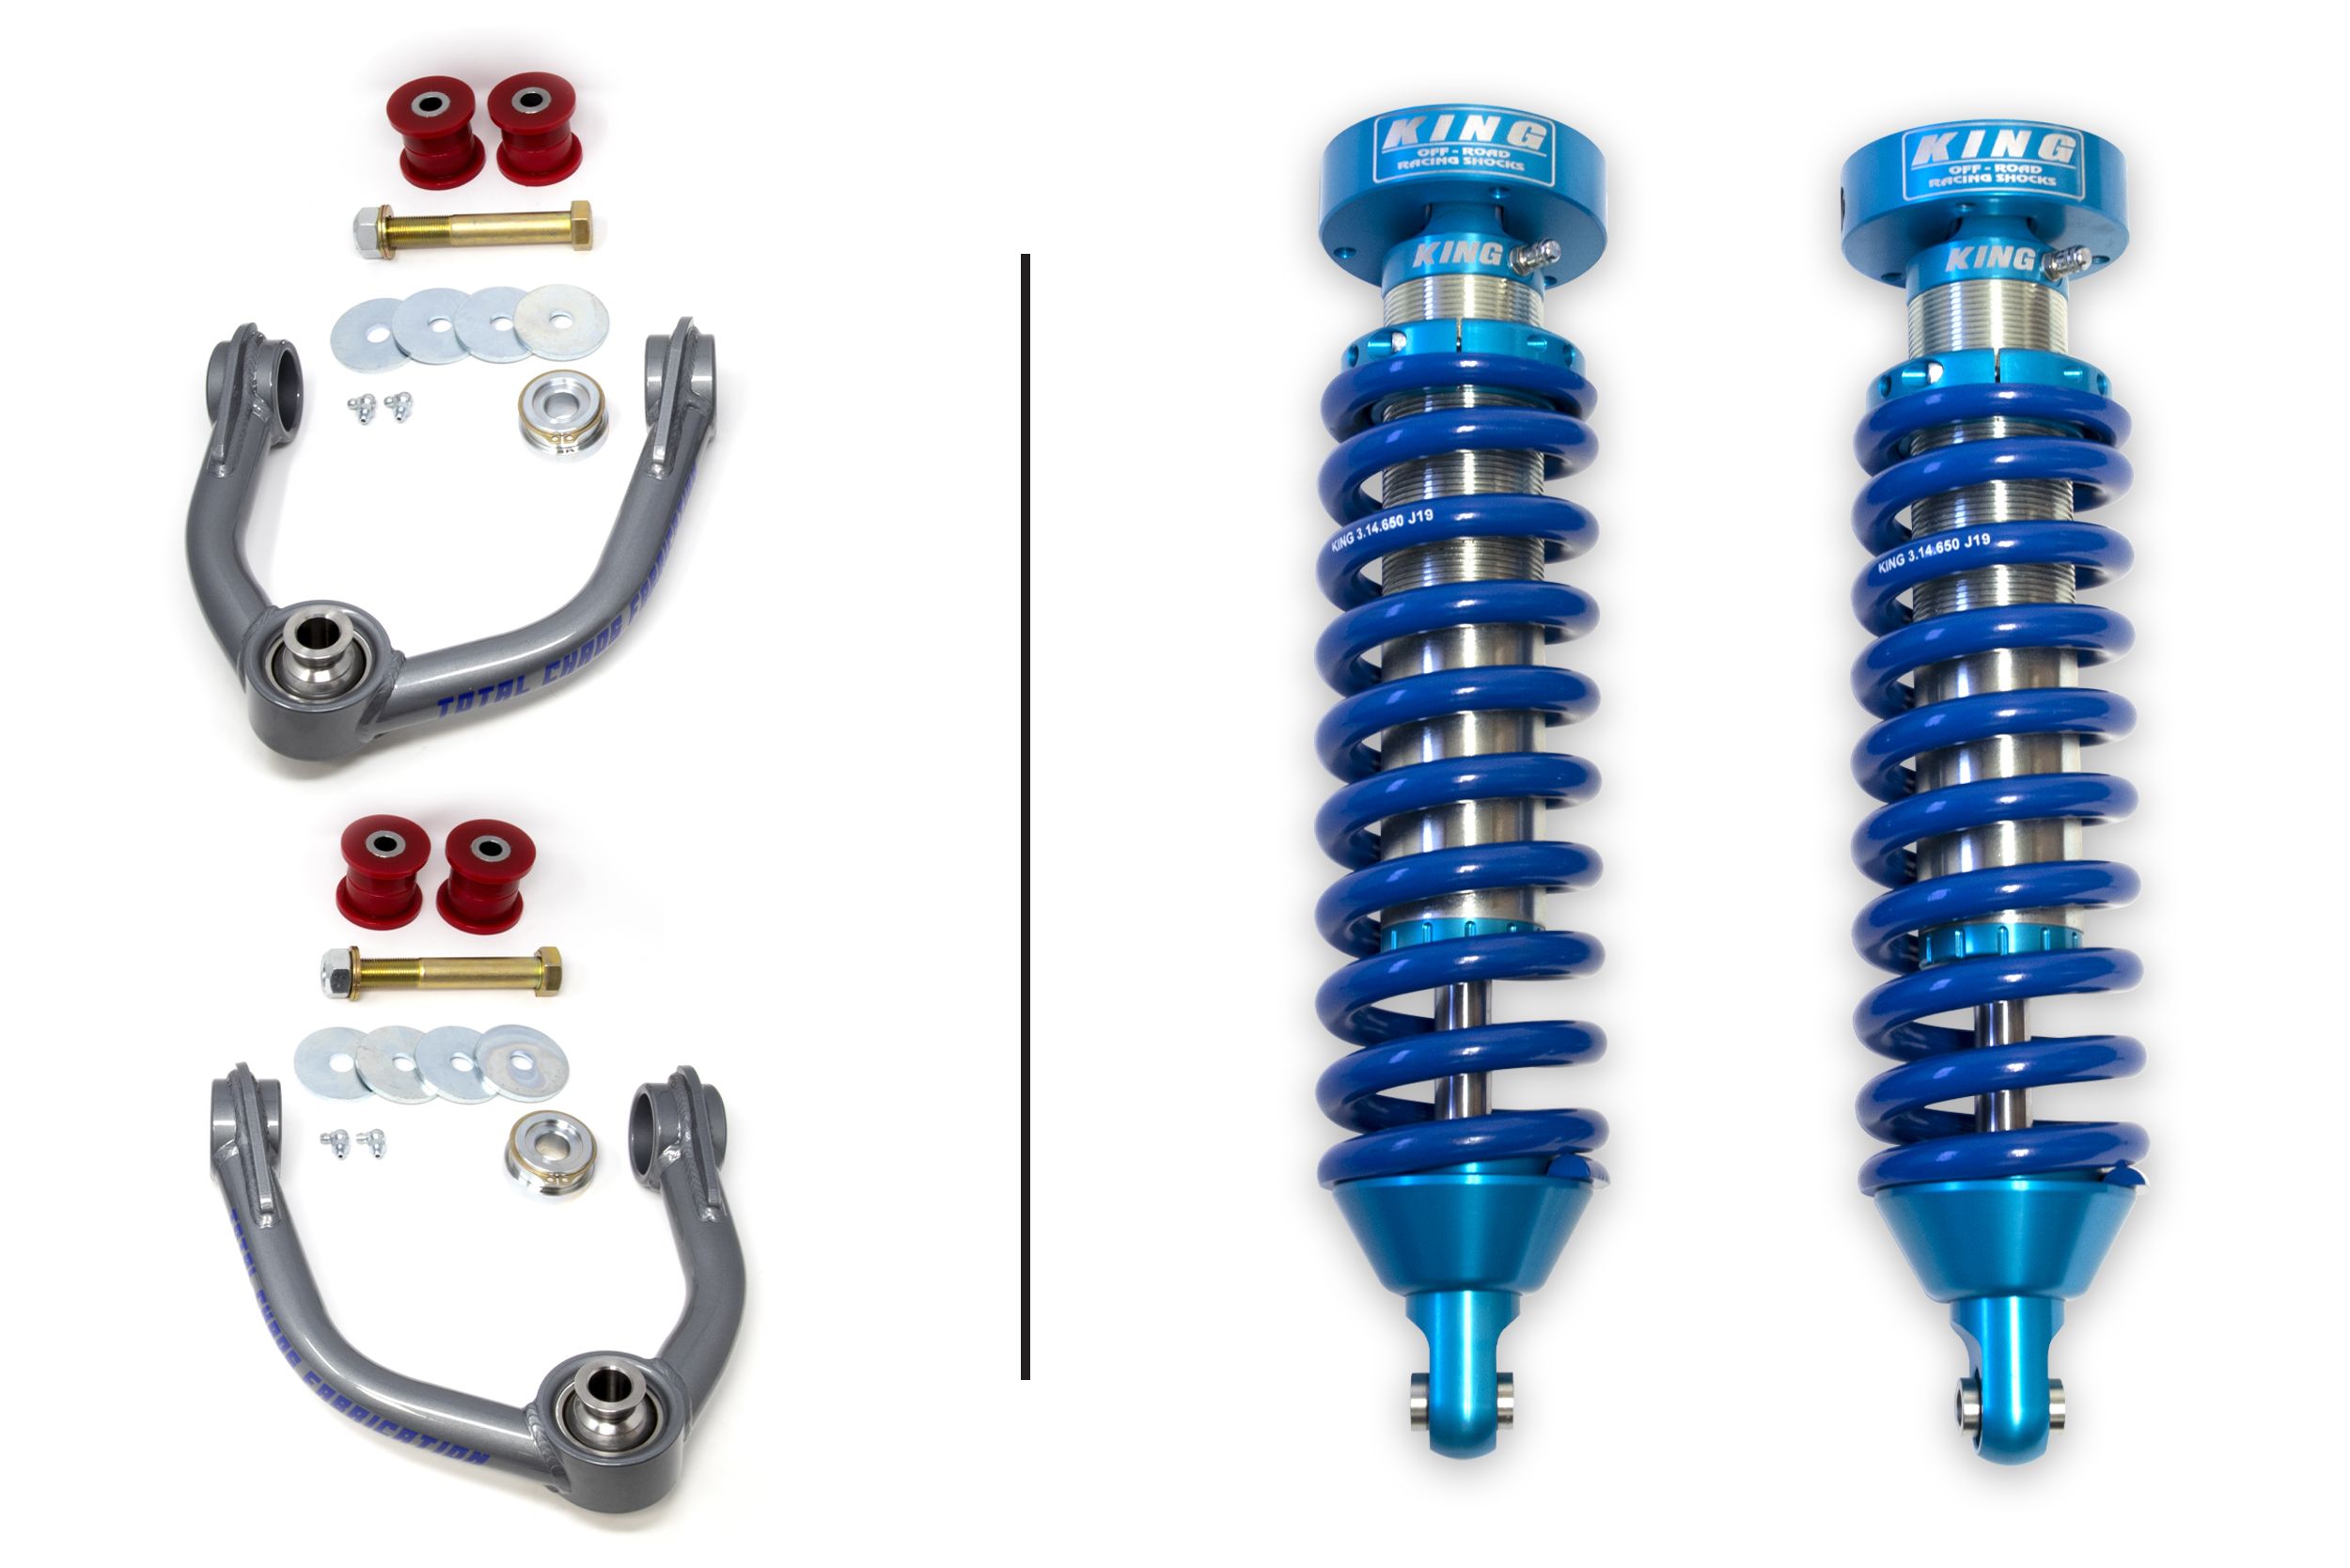 1996-2004 TOYOTA TACOMA FRONT SUSPENSION LIFT UNIBALL UCA / KING COILOVER KIT